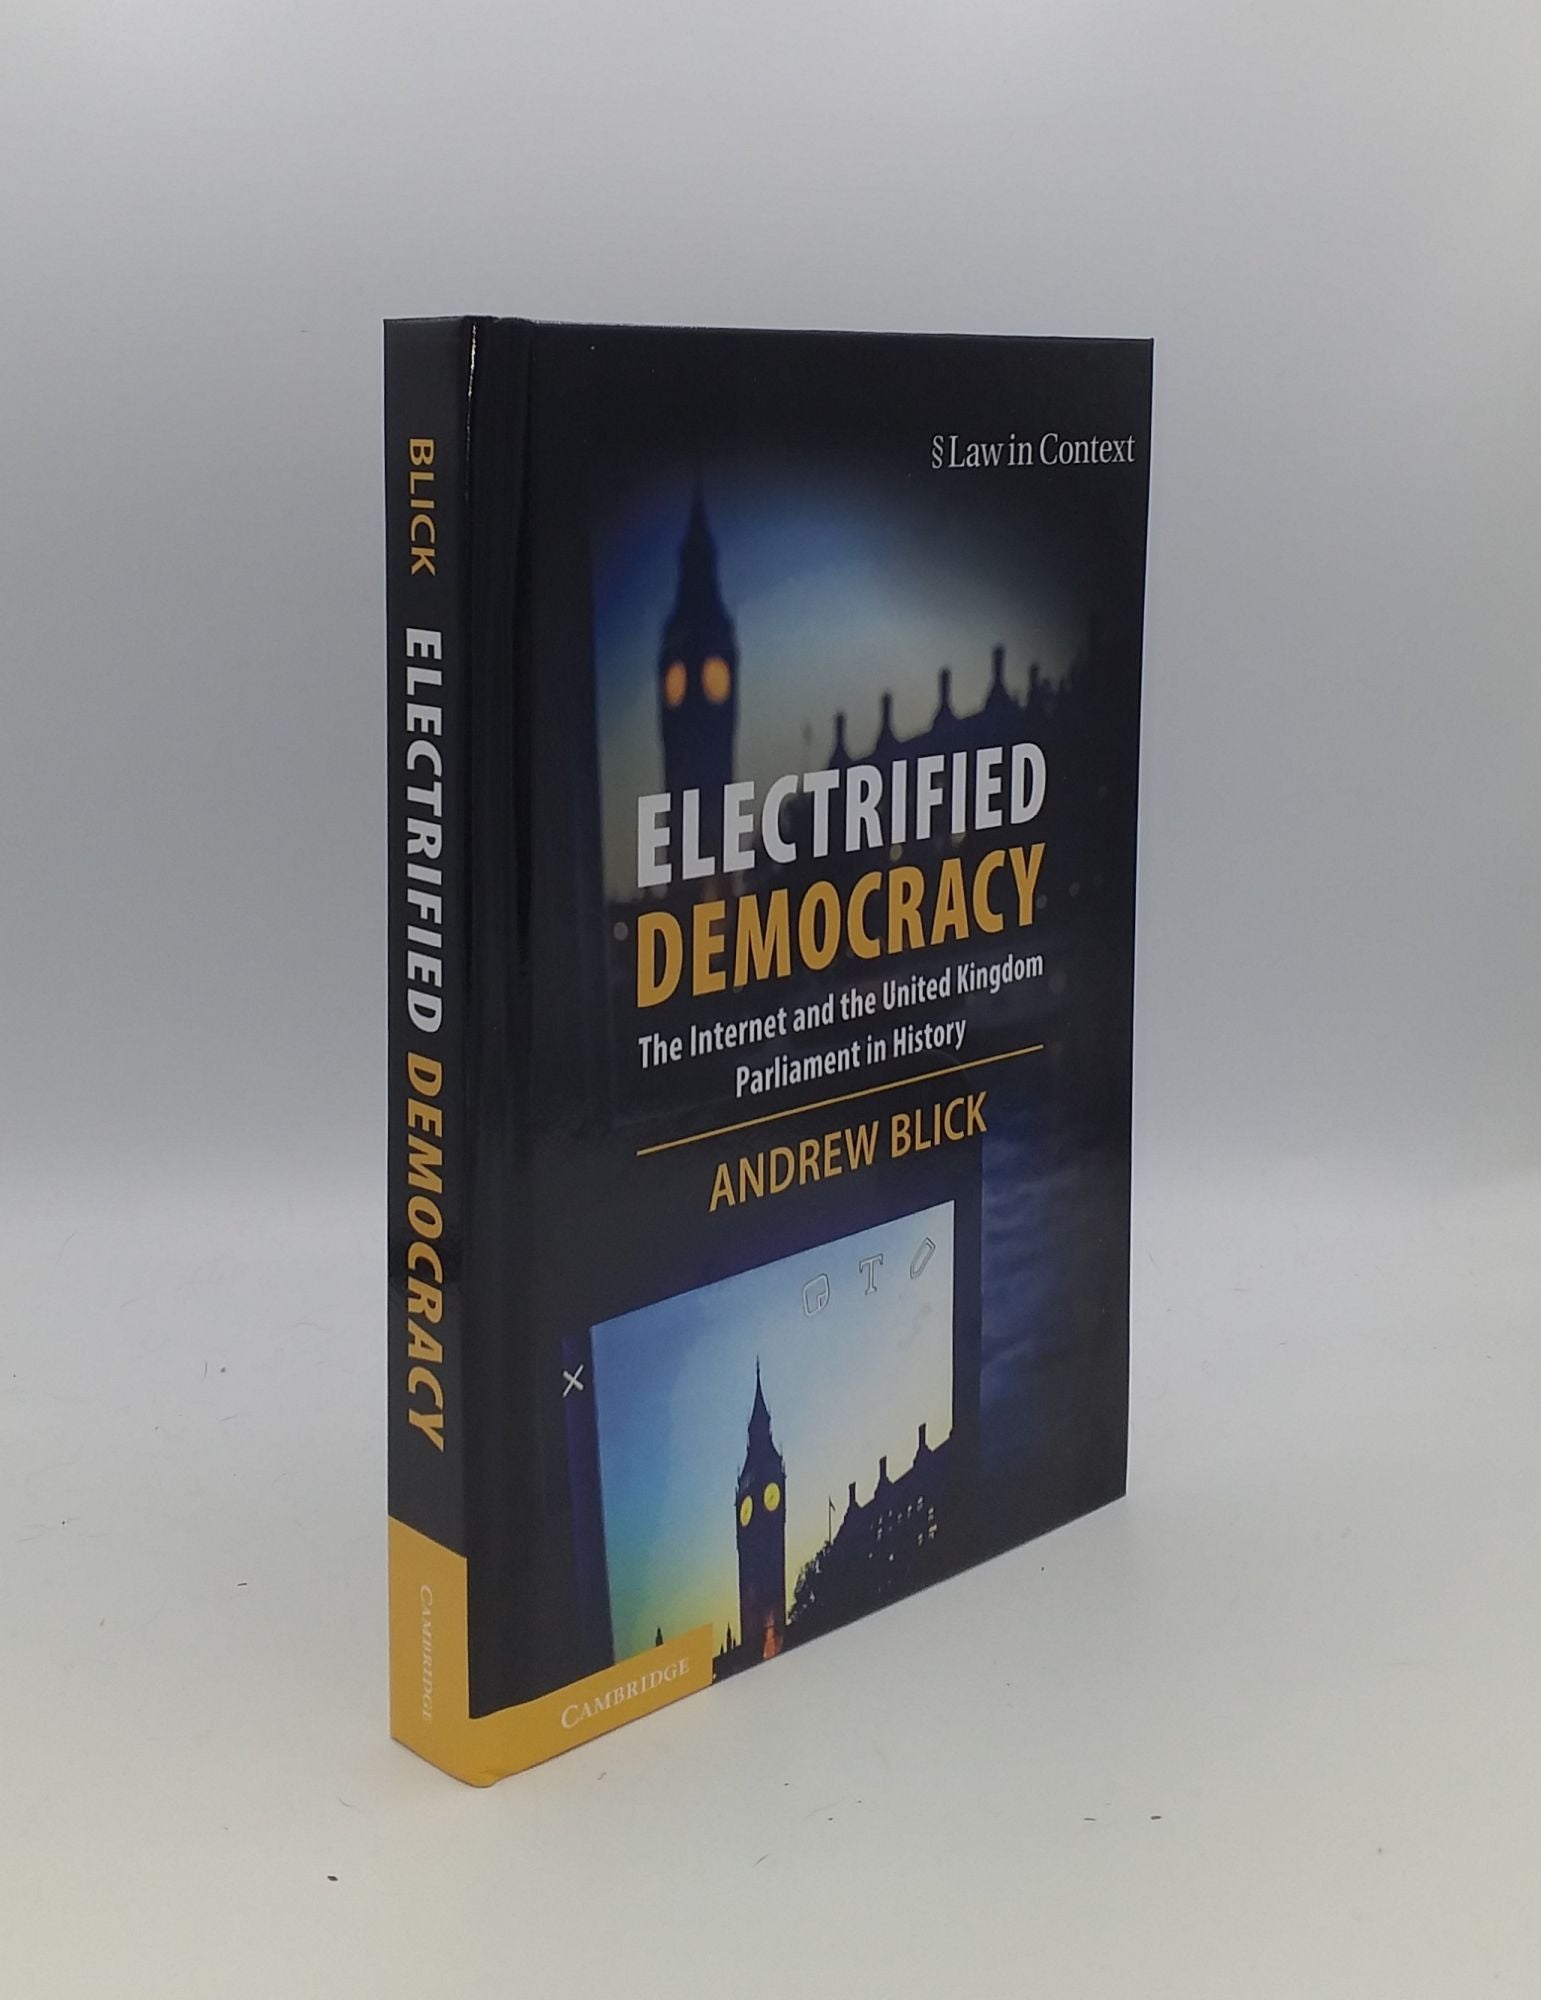 BLICK Andrew - Electrified Democracy the Internet and the United Kingdom Parliament in History